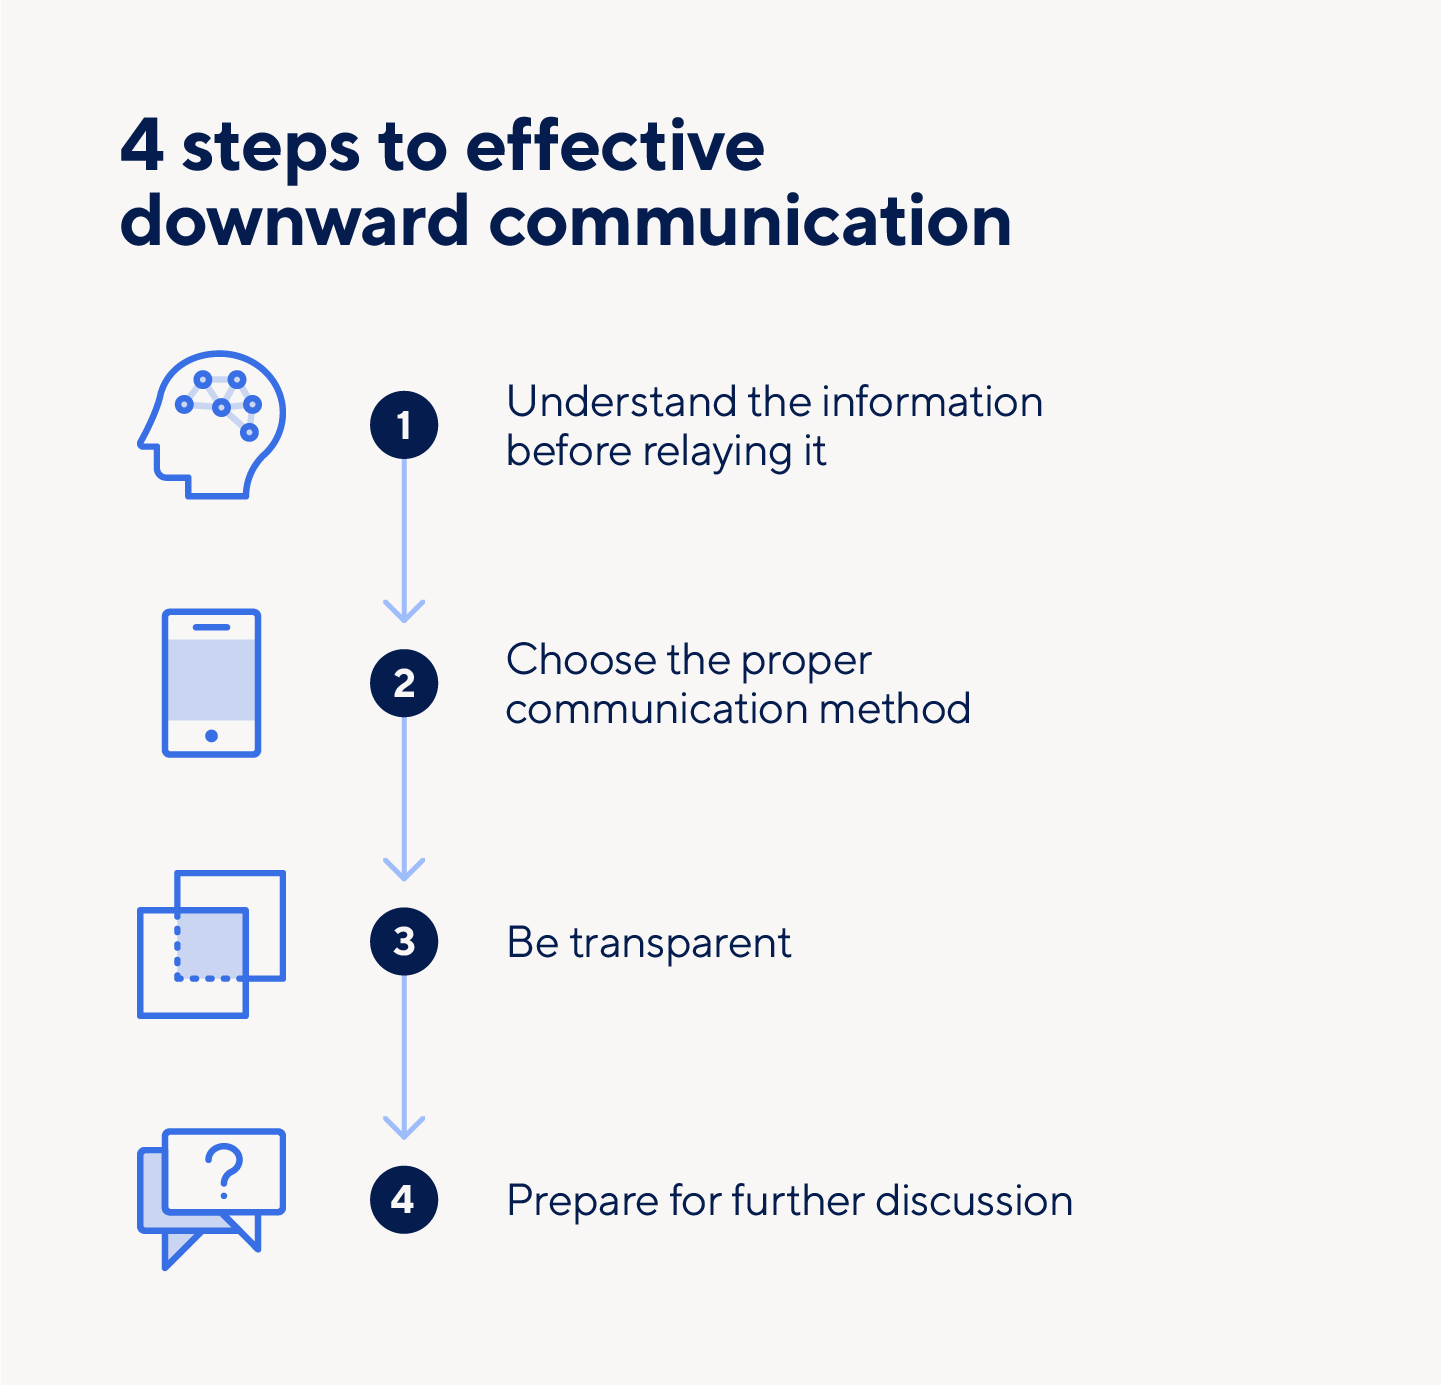 Effective downward communication occurs with four steps.